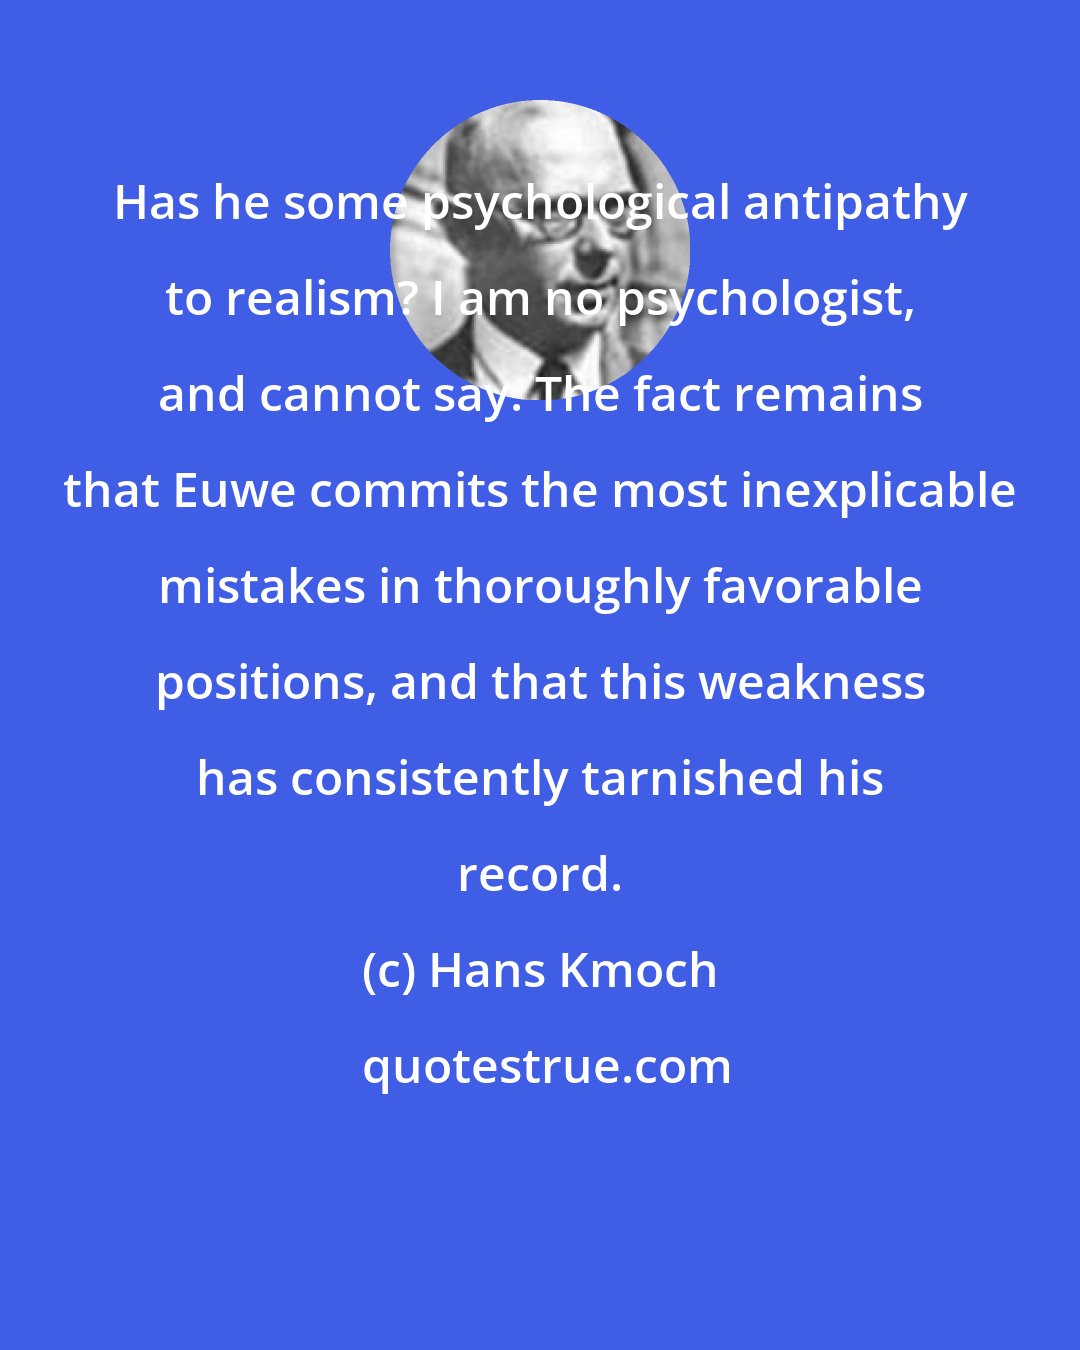 Hans Kmoch: Has he some psychological antipathy to realism? I am no psychologist, and cannot say. The fact remains that Euwe commits the most inexplicable mistakes in thoroughly favorable positions, and that this weakness has consistently tarnished his record.